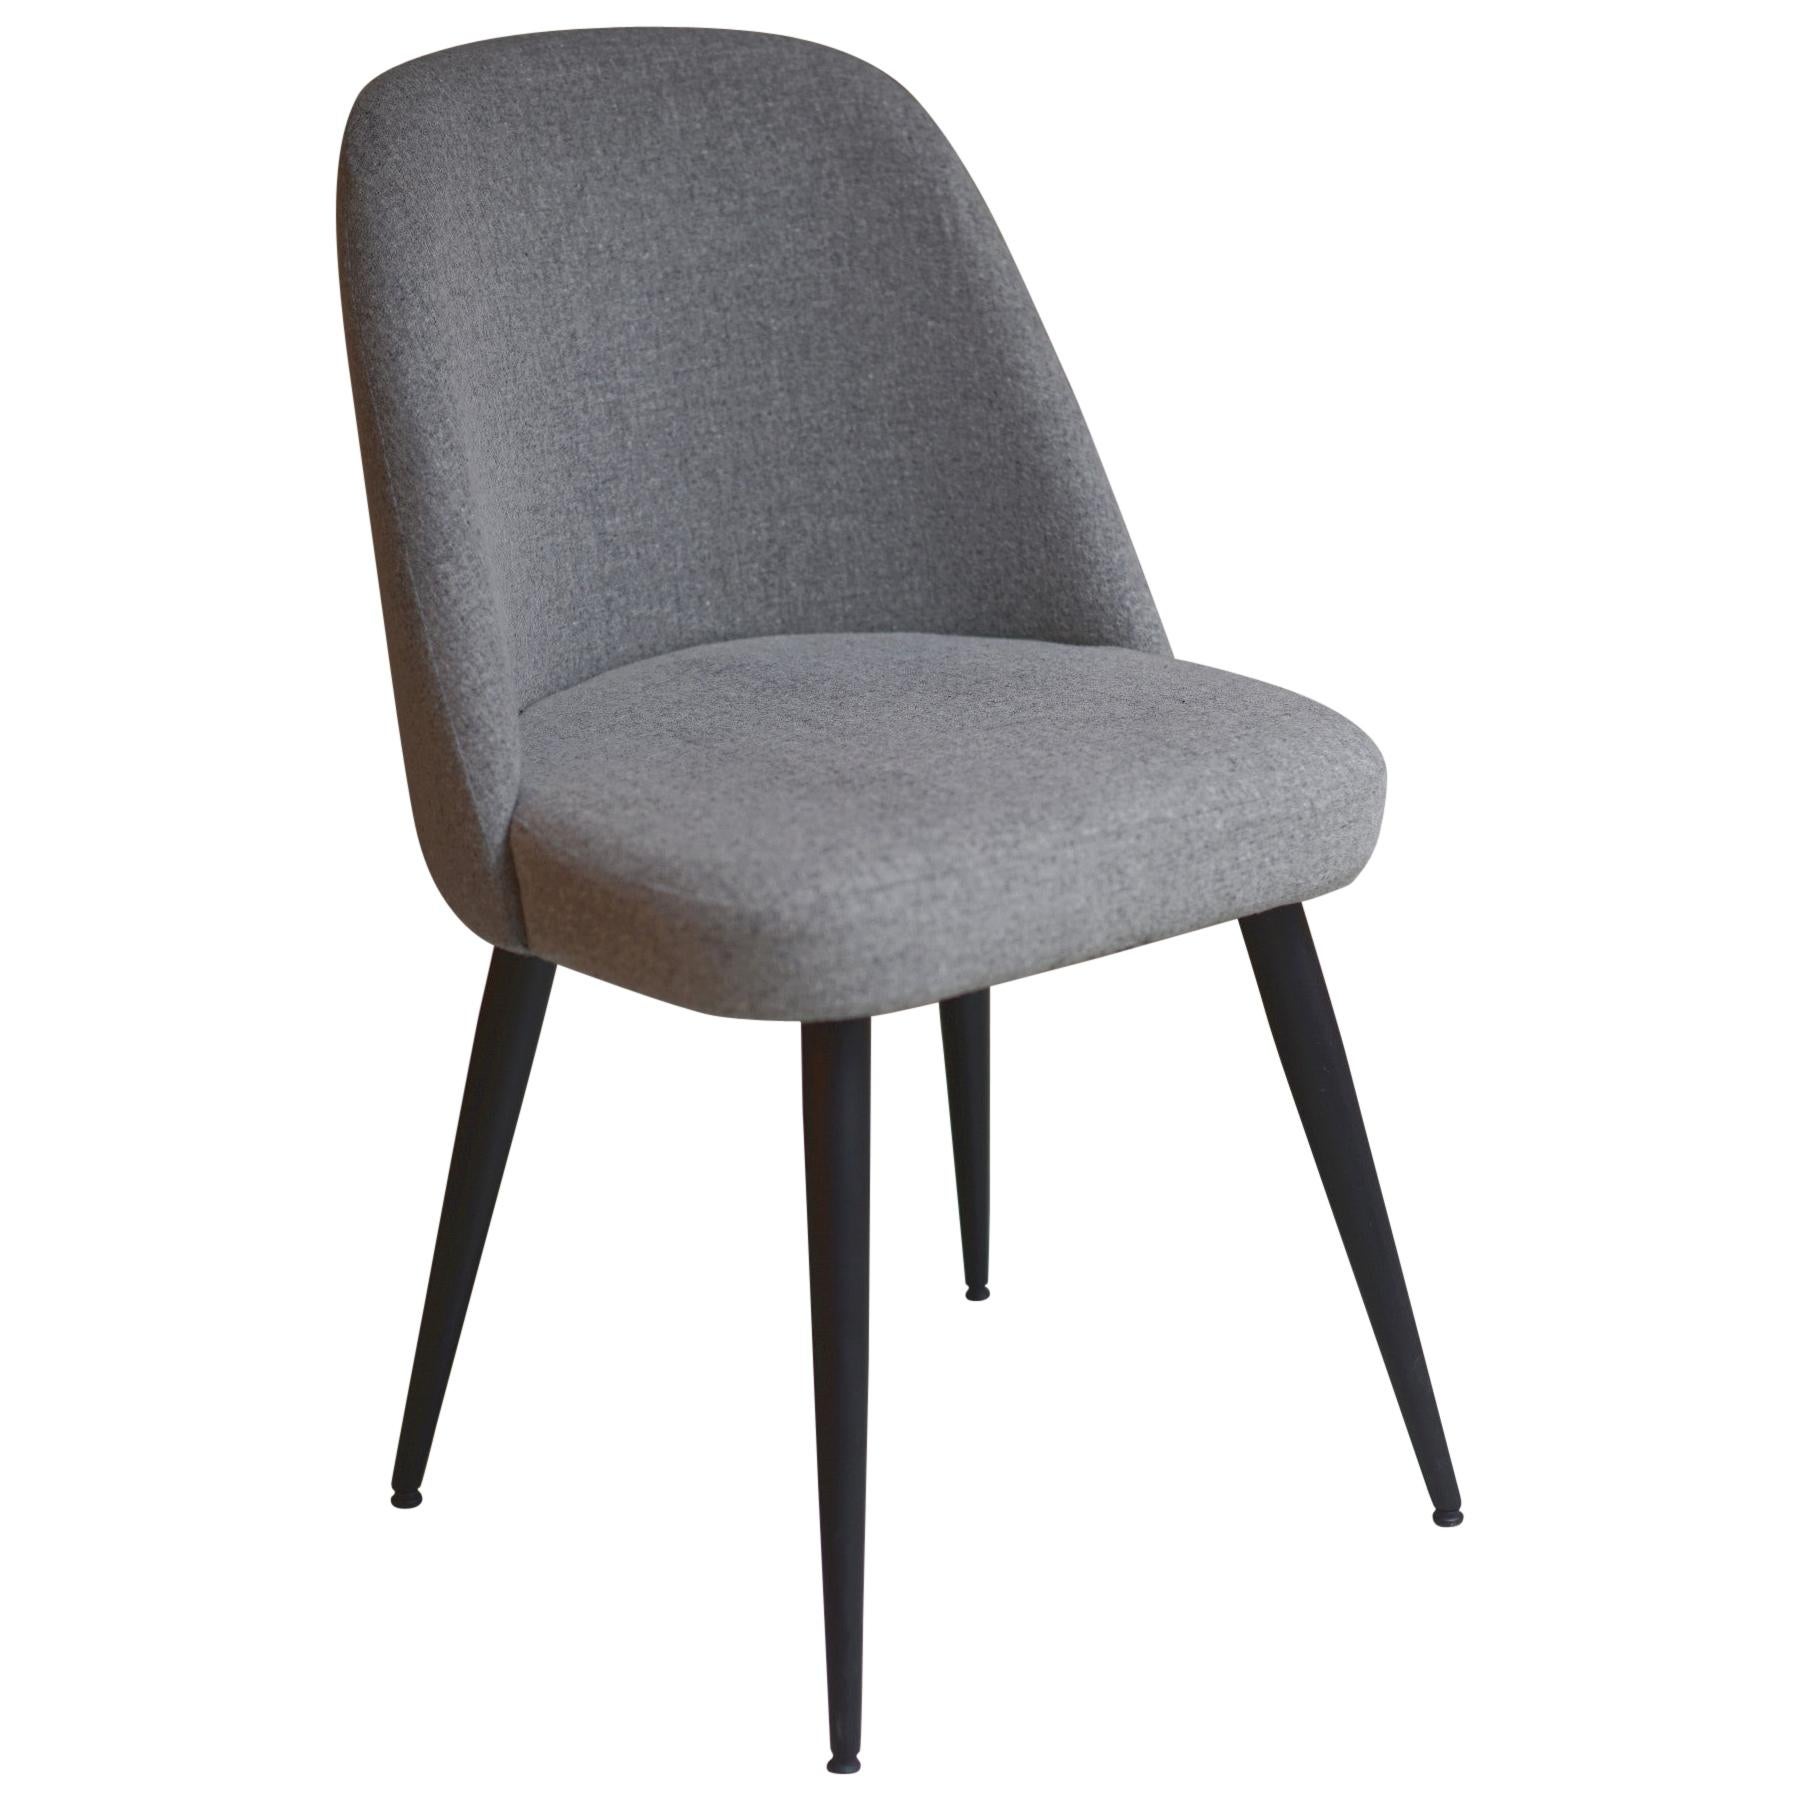 Modern Light Ash Gray Fabric Dining Chair with Steel Base Black Conical Legs For Sale